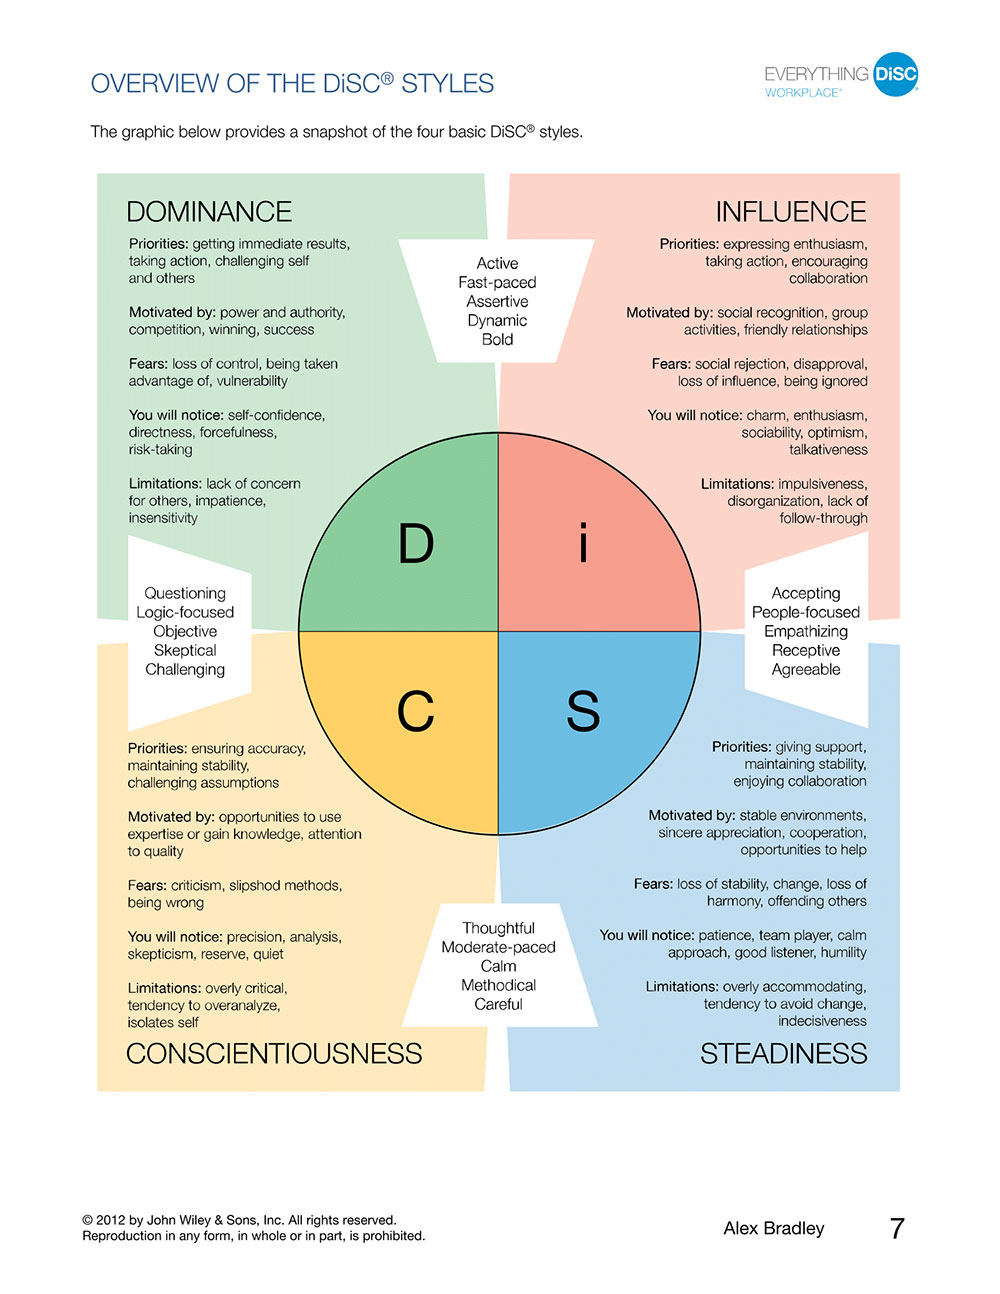 disc assessment results explained